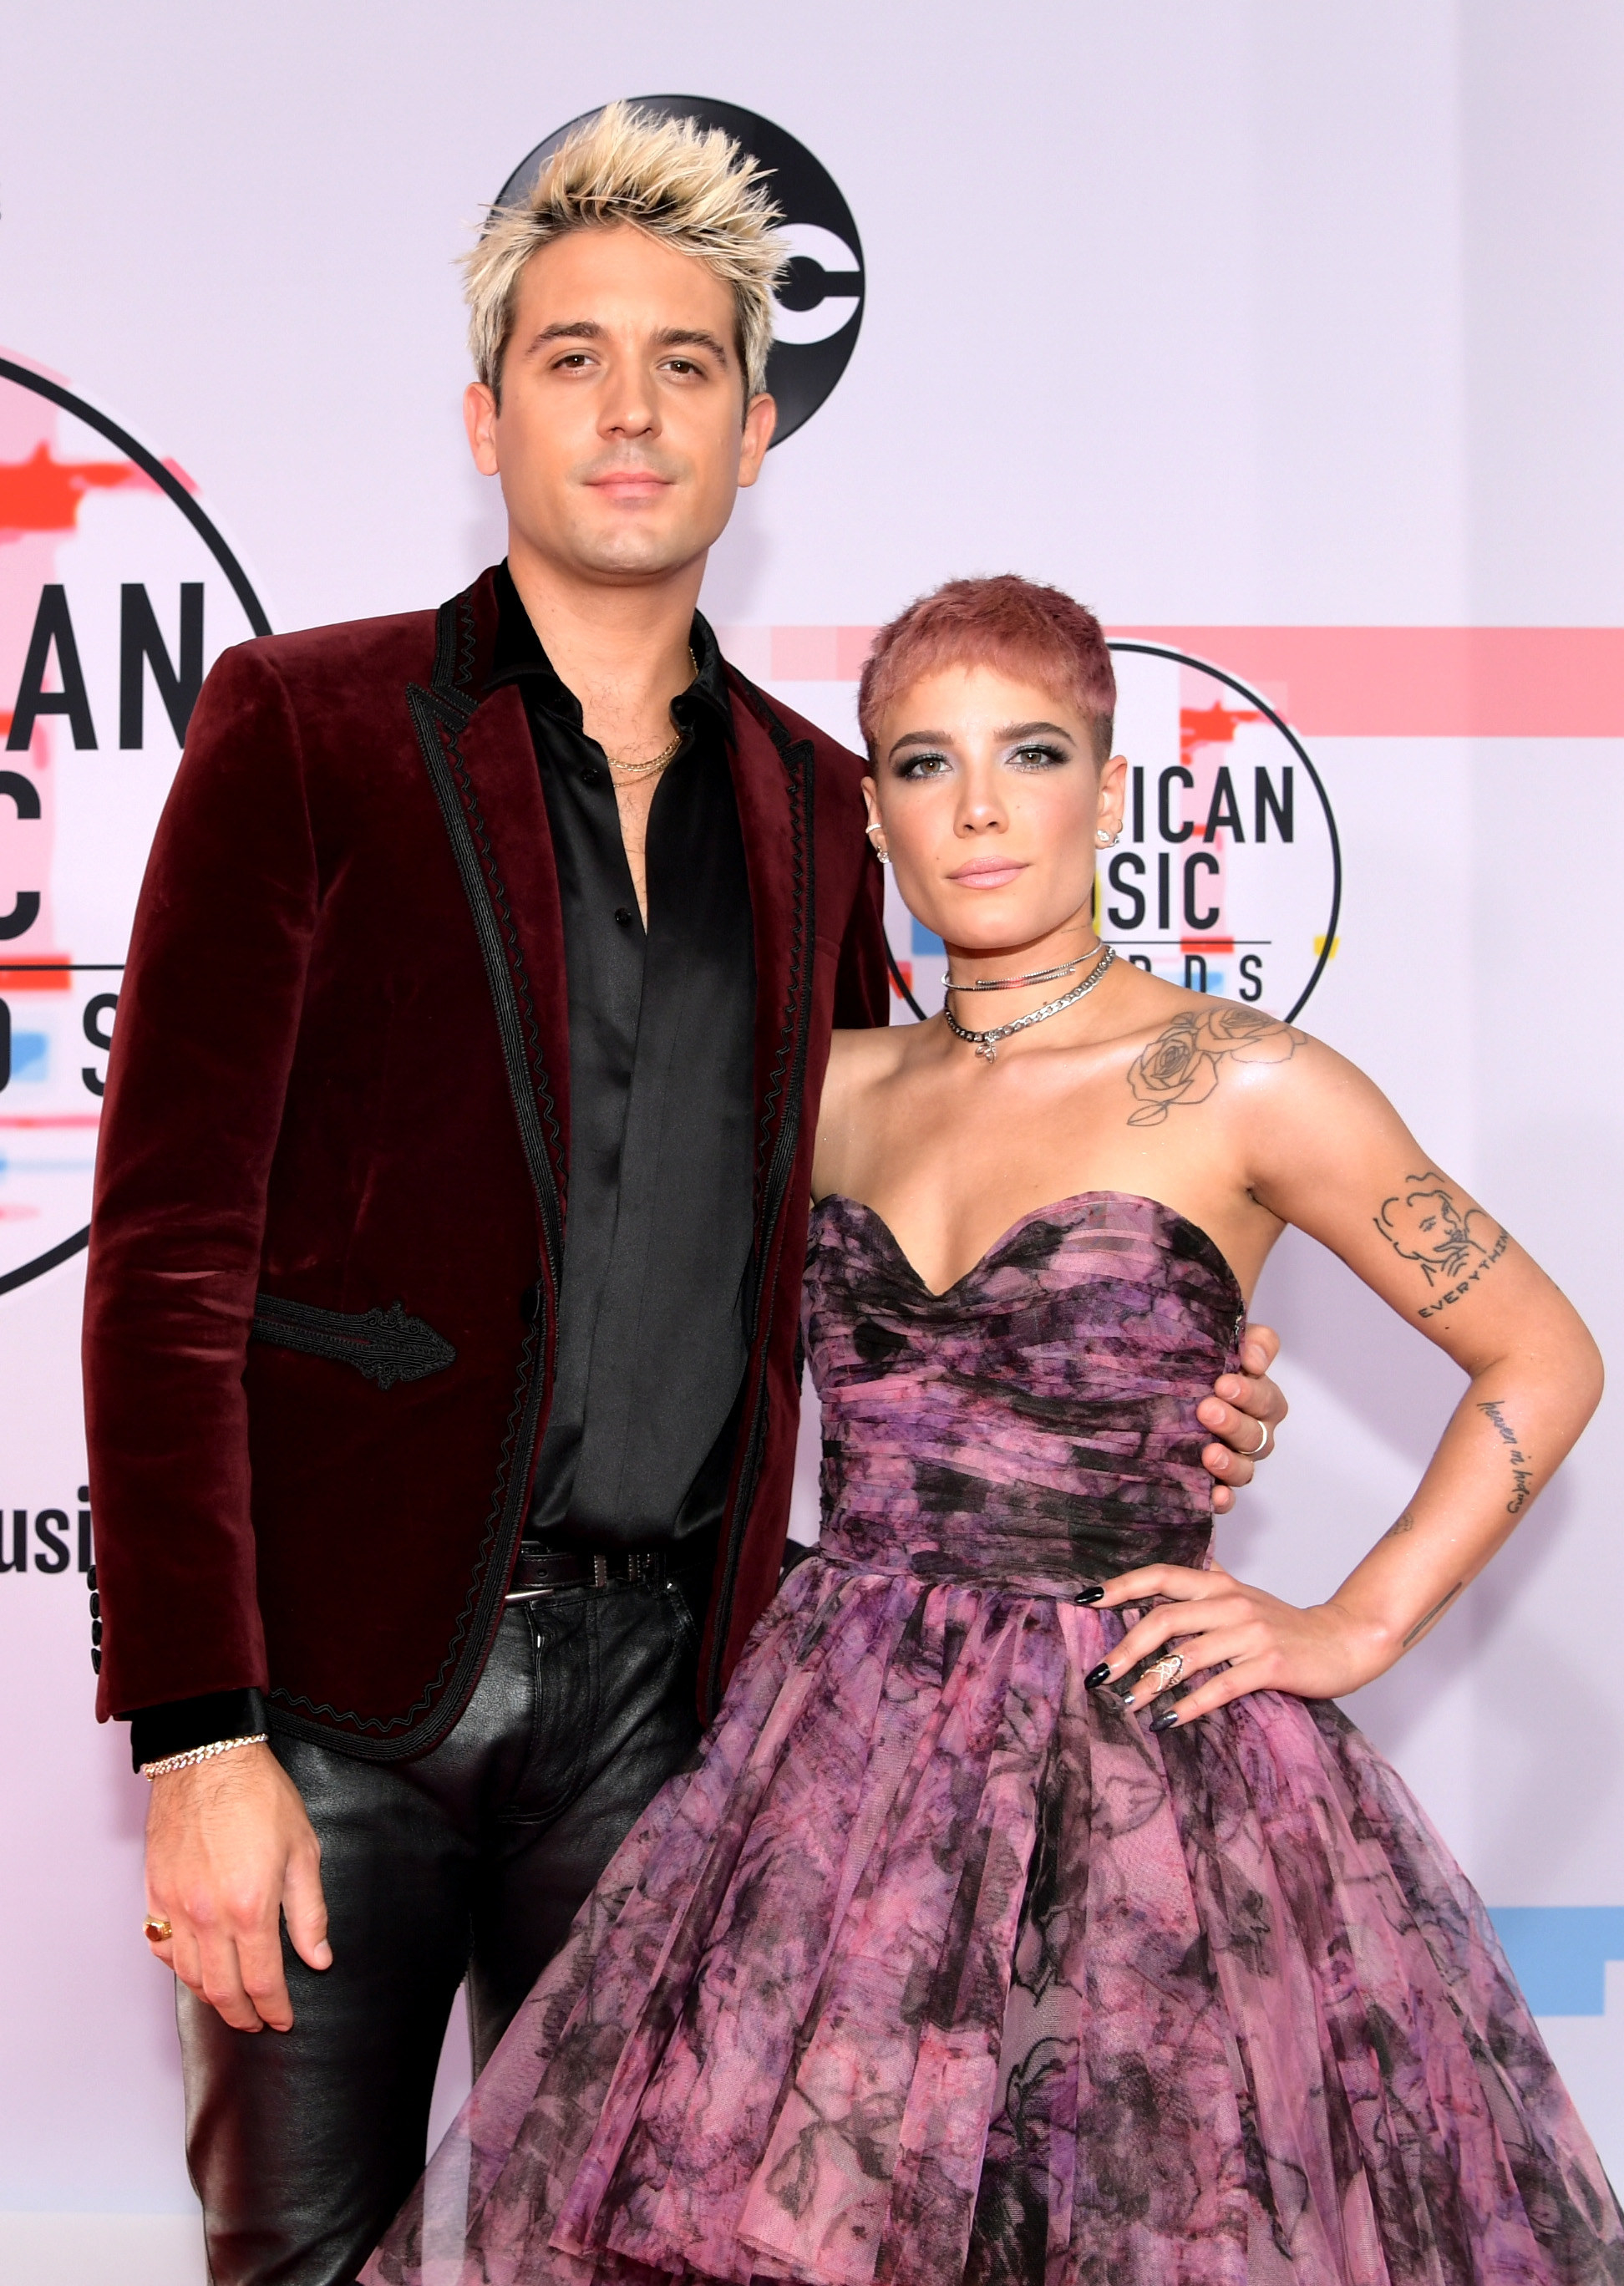 G-Eazy and Halsey pose at the American Music Awards on October 9, 2018